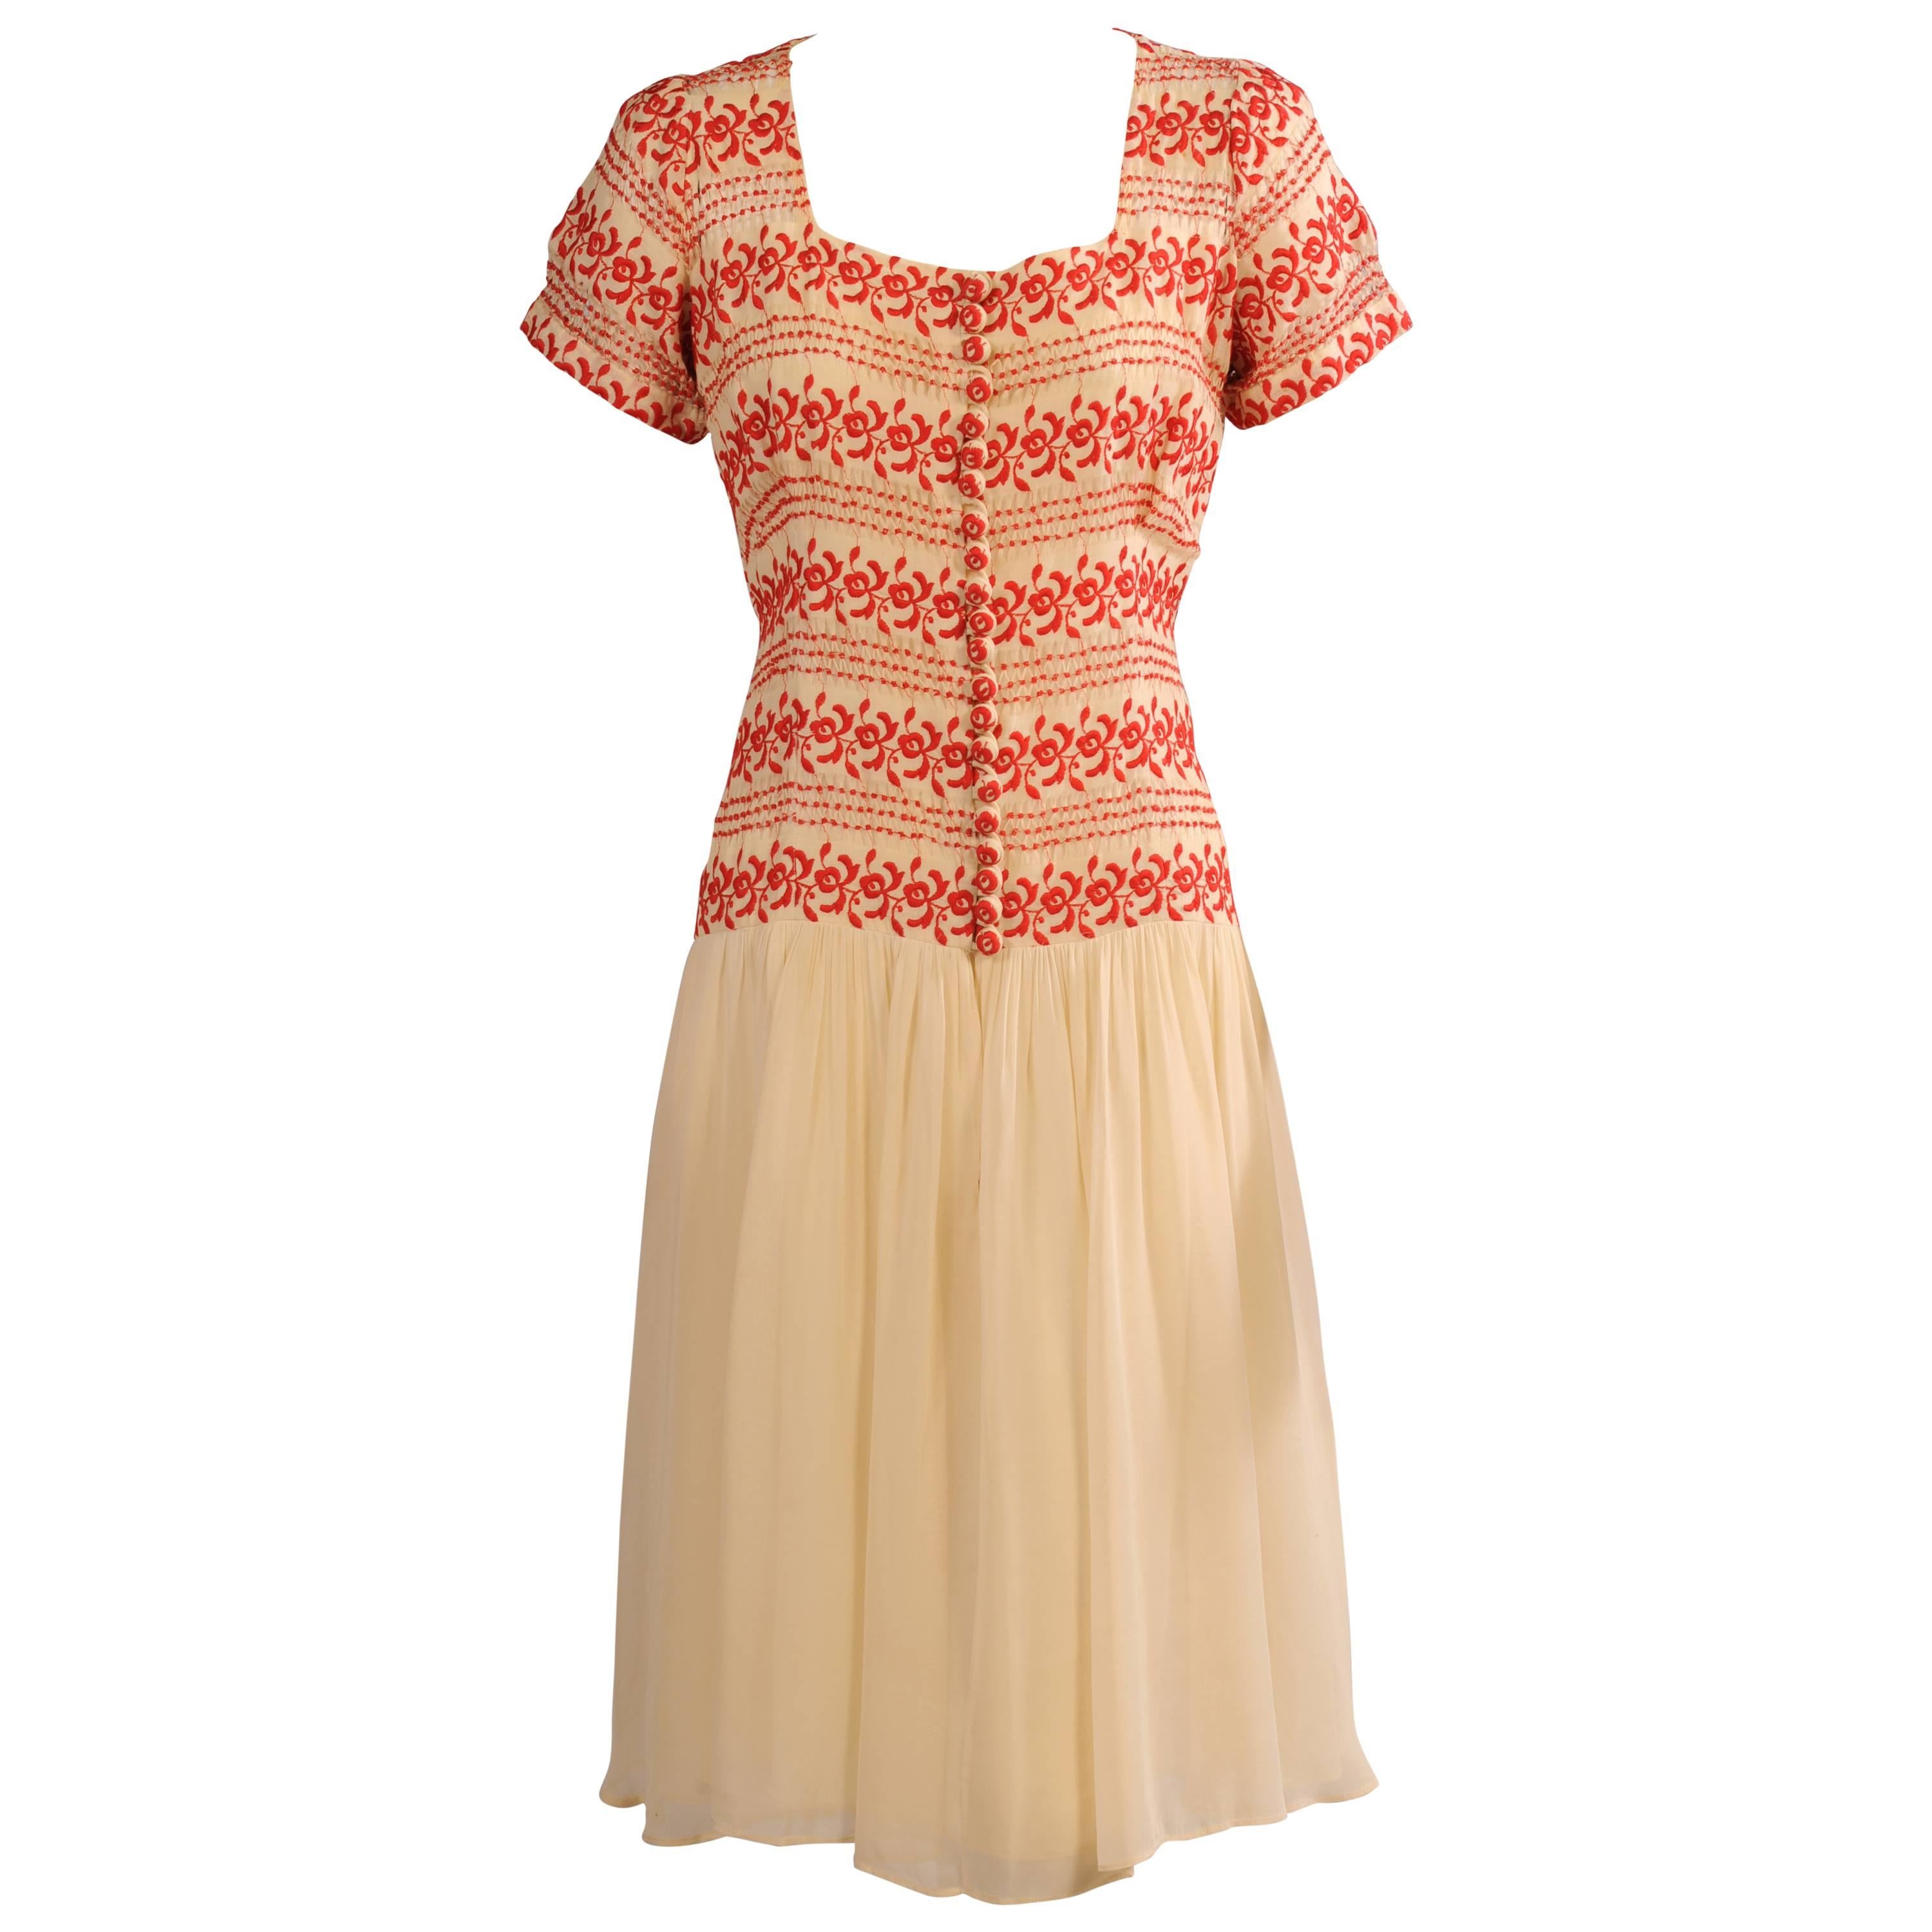 1930's Vintage Red and Cream Embroidered Dress